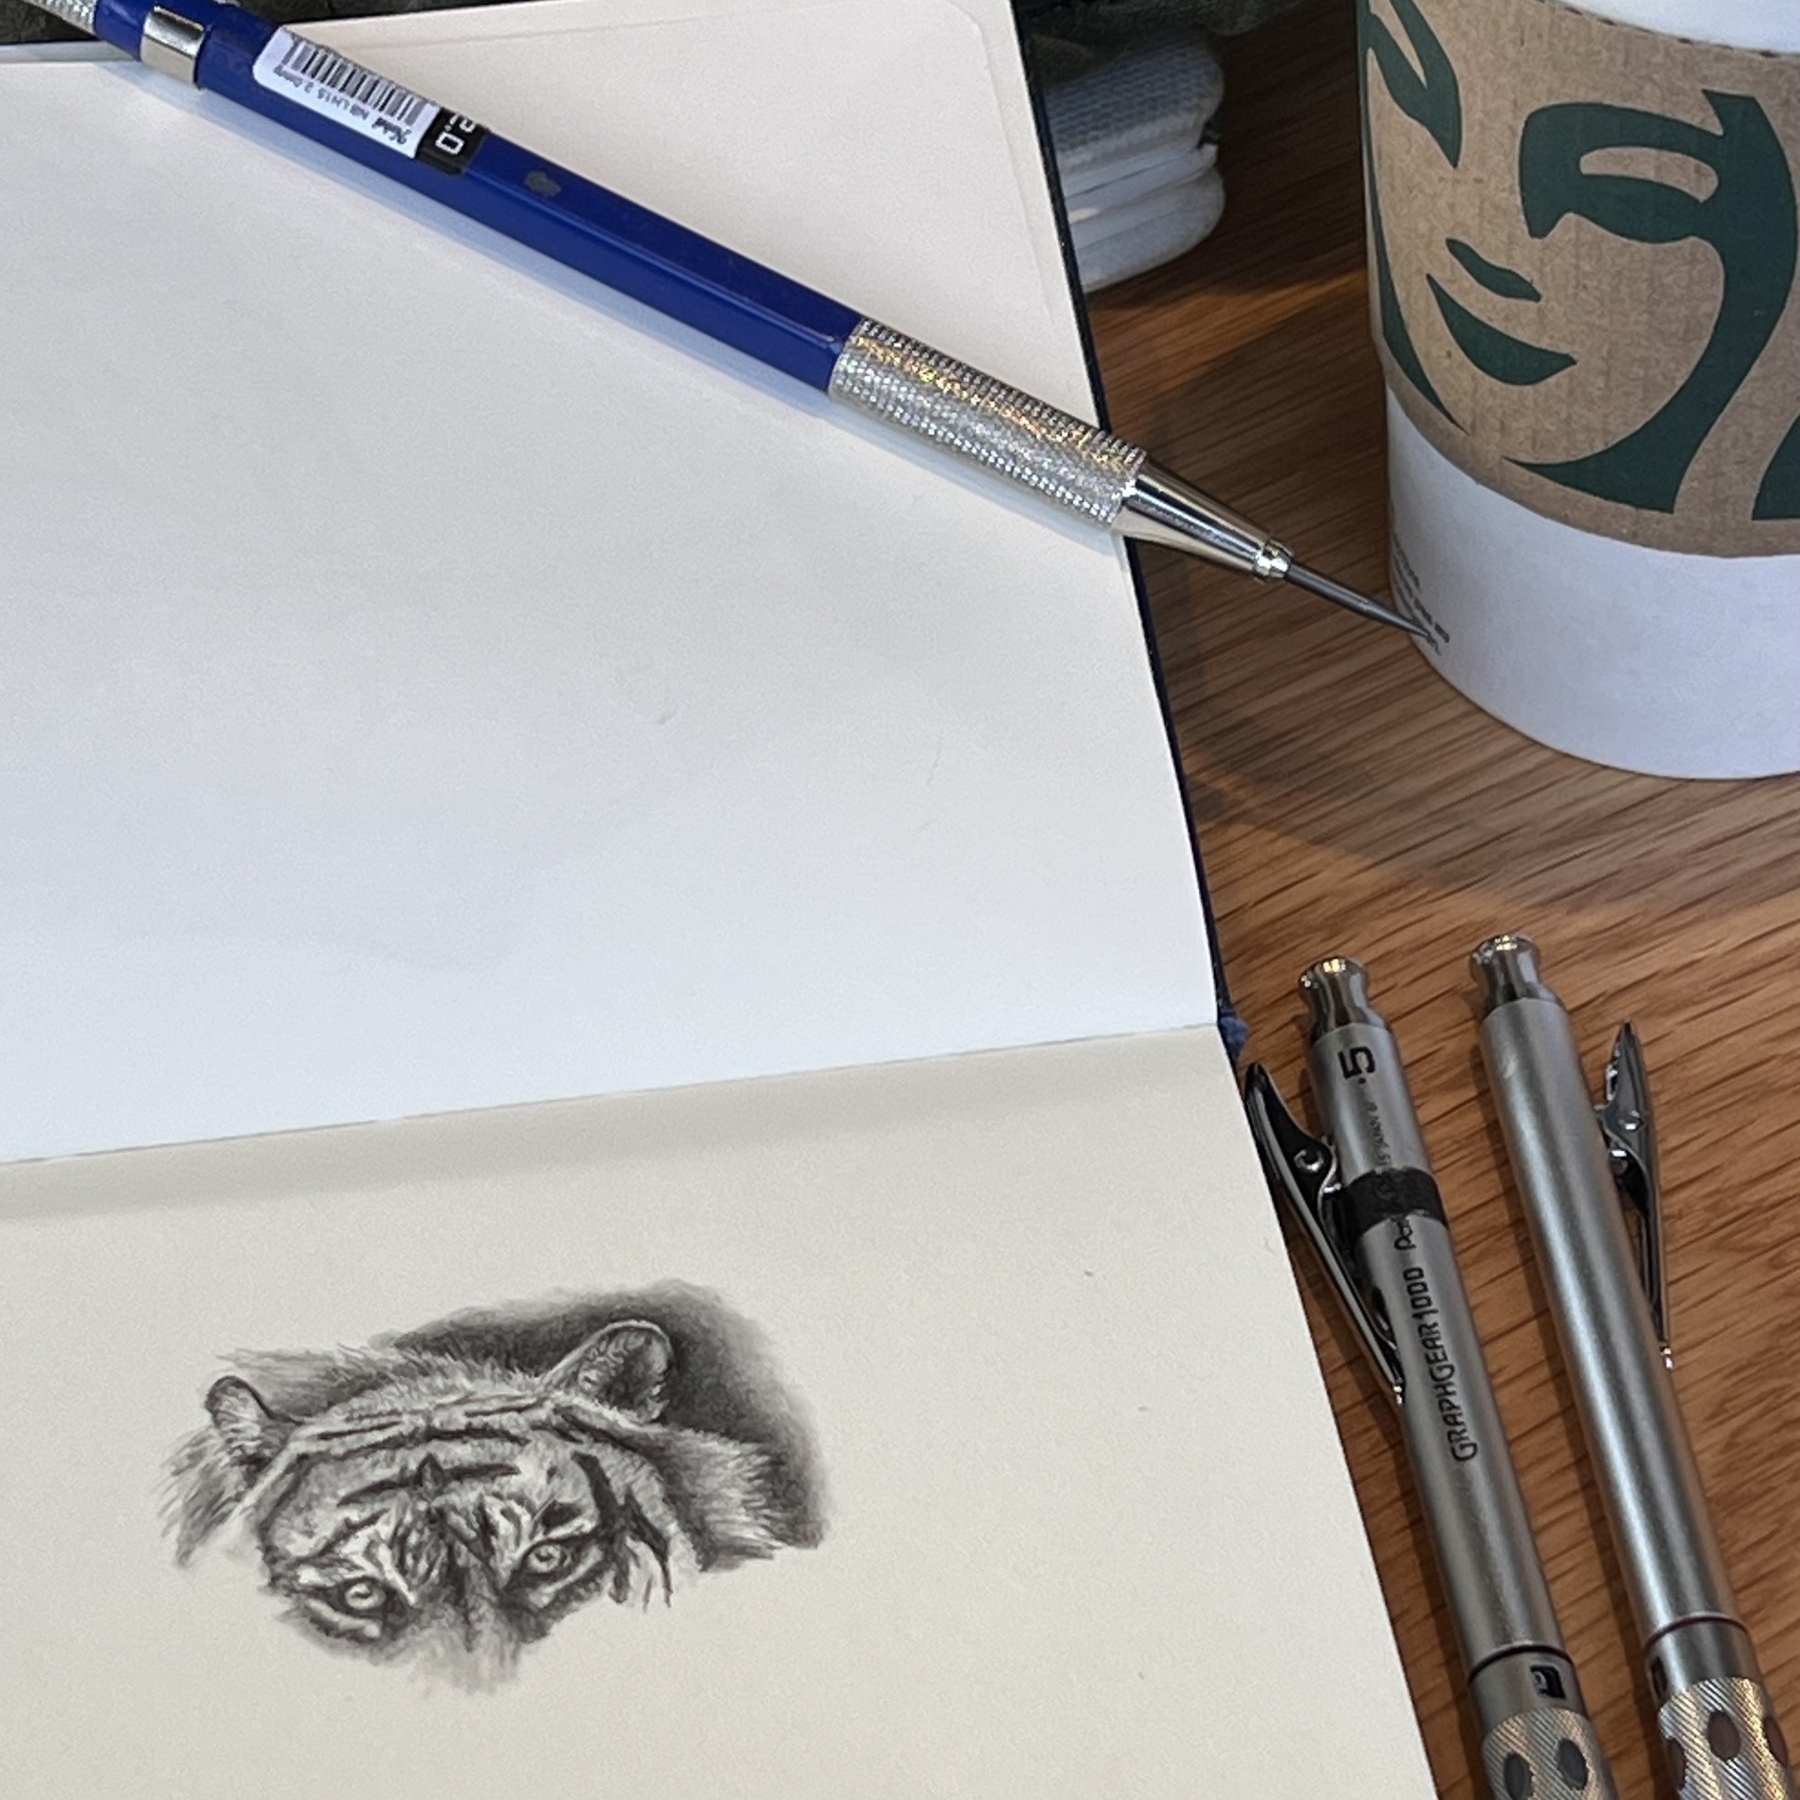 A drawing of a tiger’s head in a sketchbook. Surrounded by three mechanical pencils and a Starbucks coffee cup. 